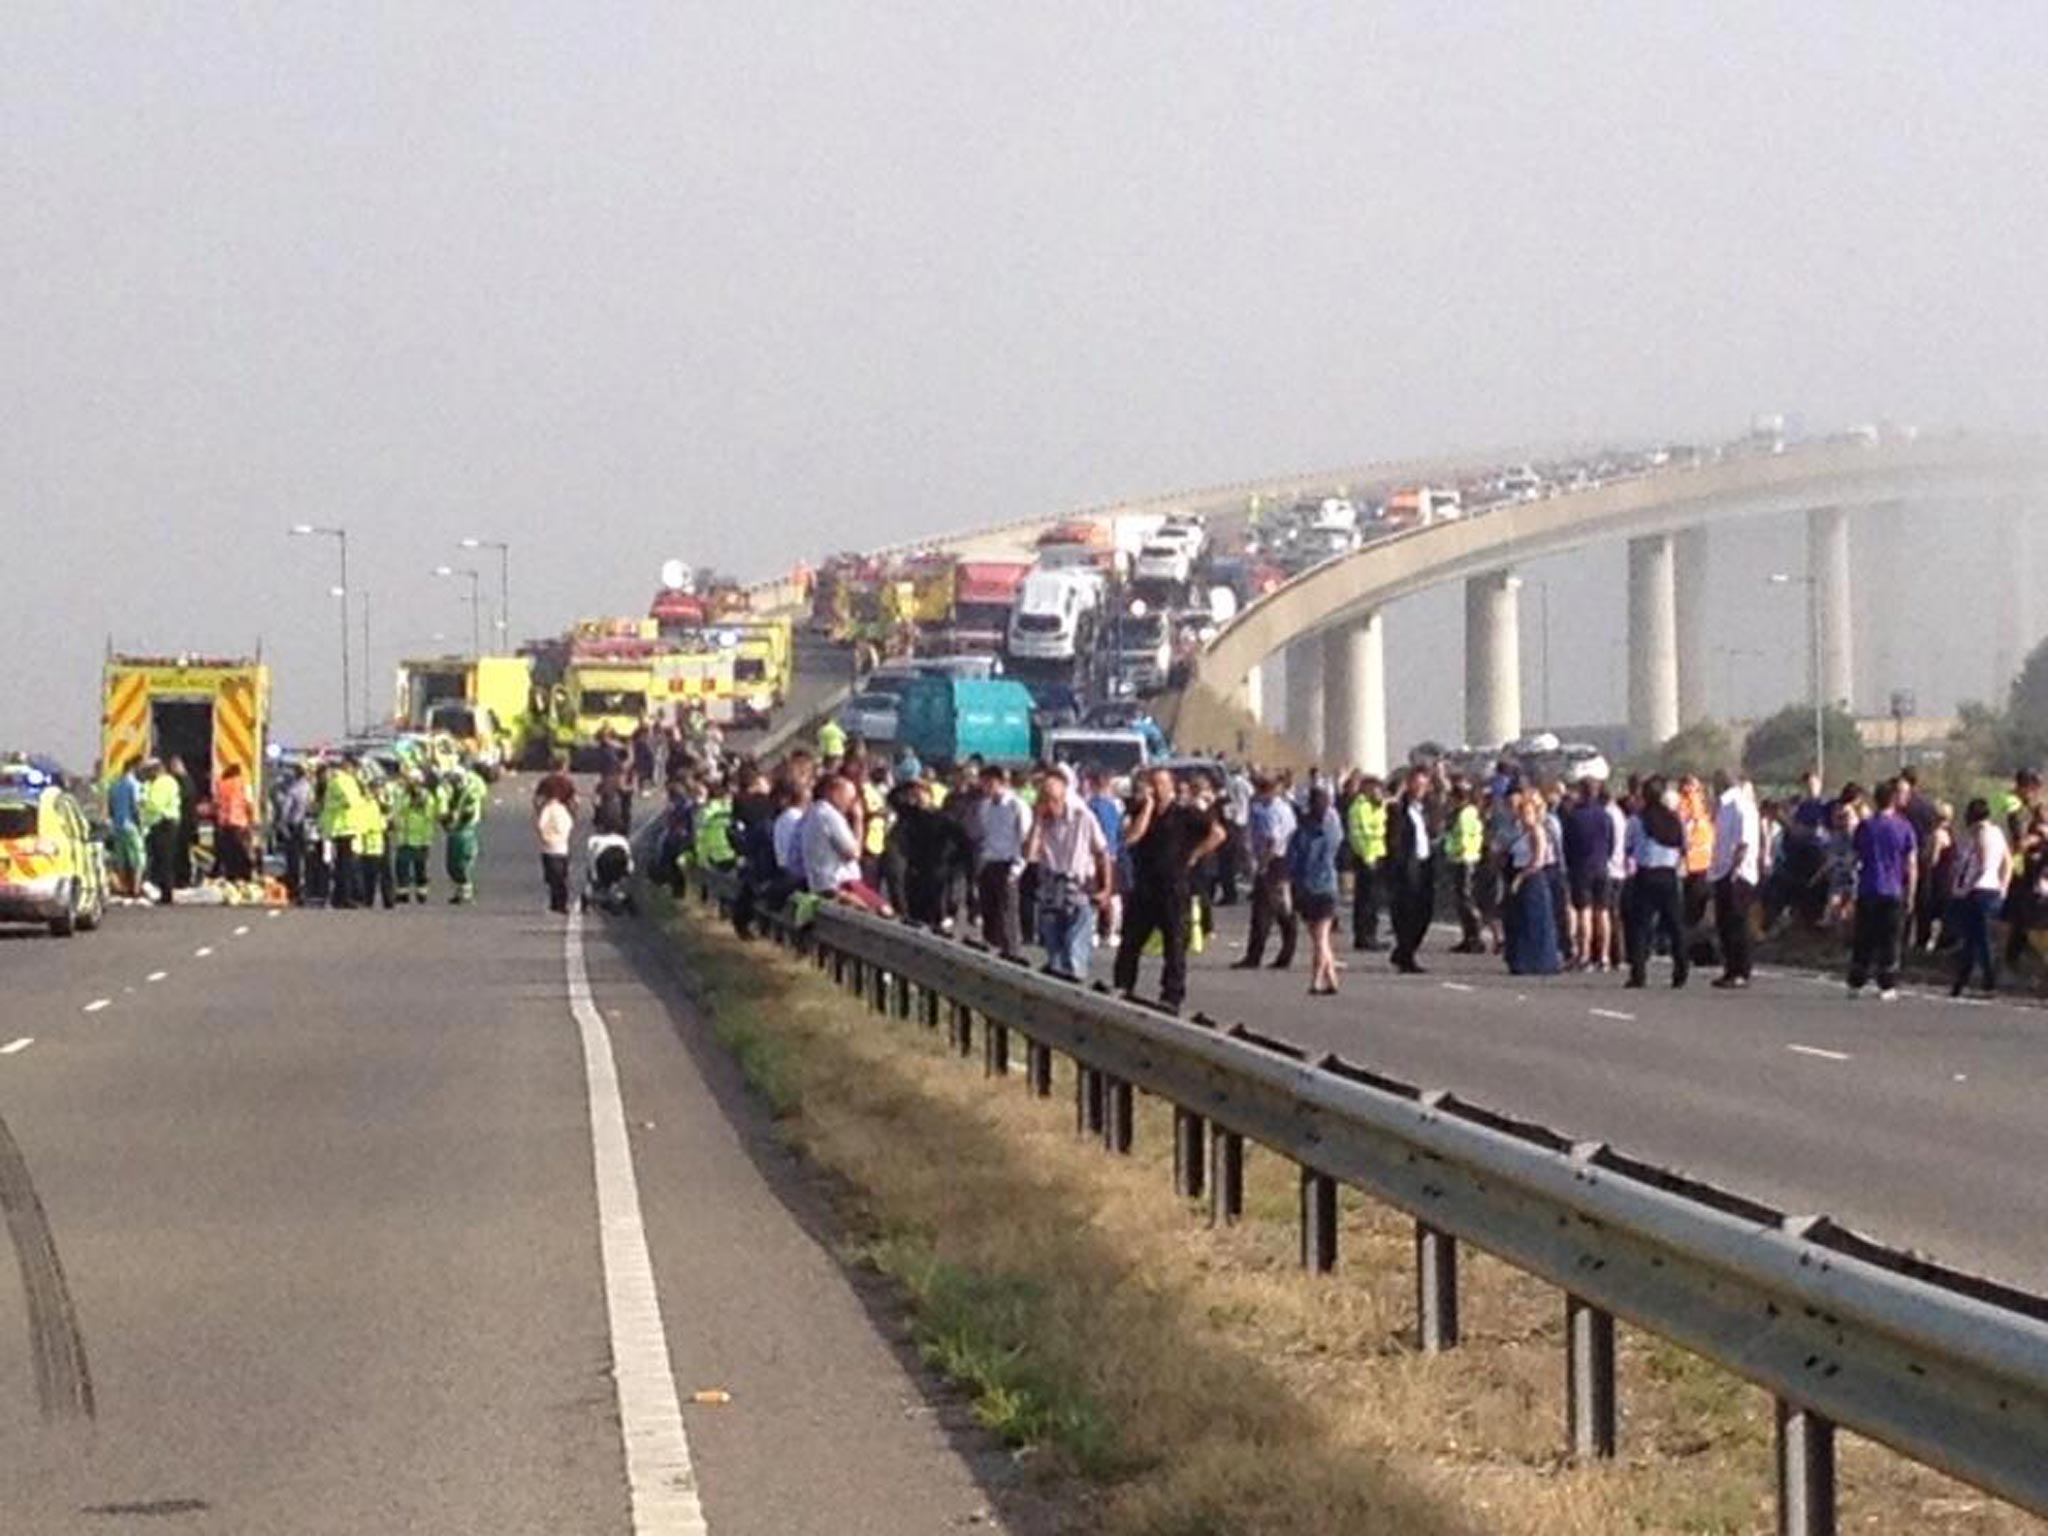 Scene on the Sheppey Bridge this morning after 100 vehicle pile up in thick fog